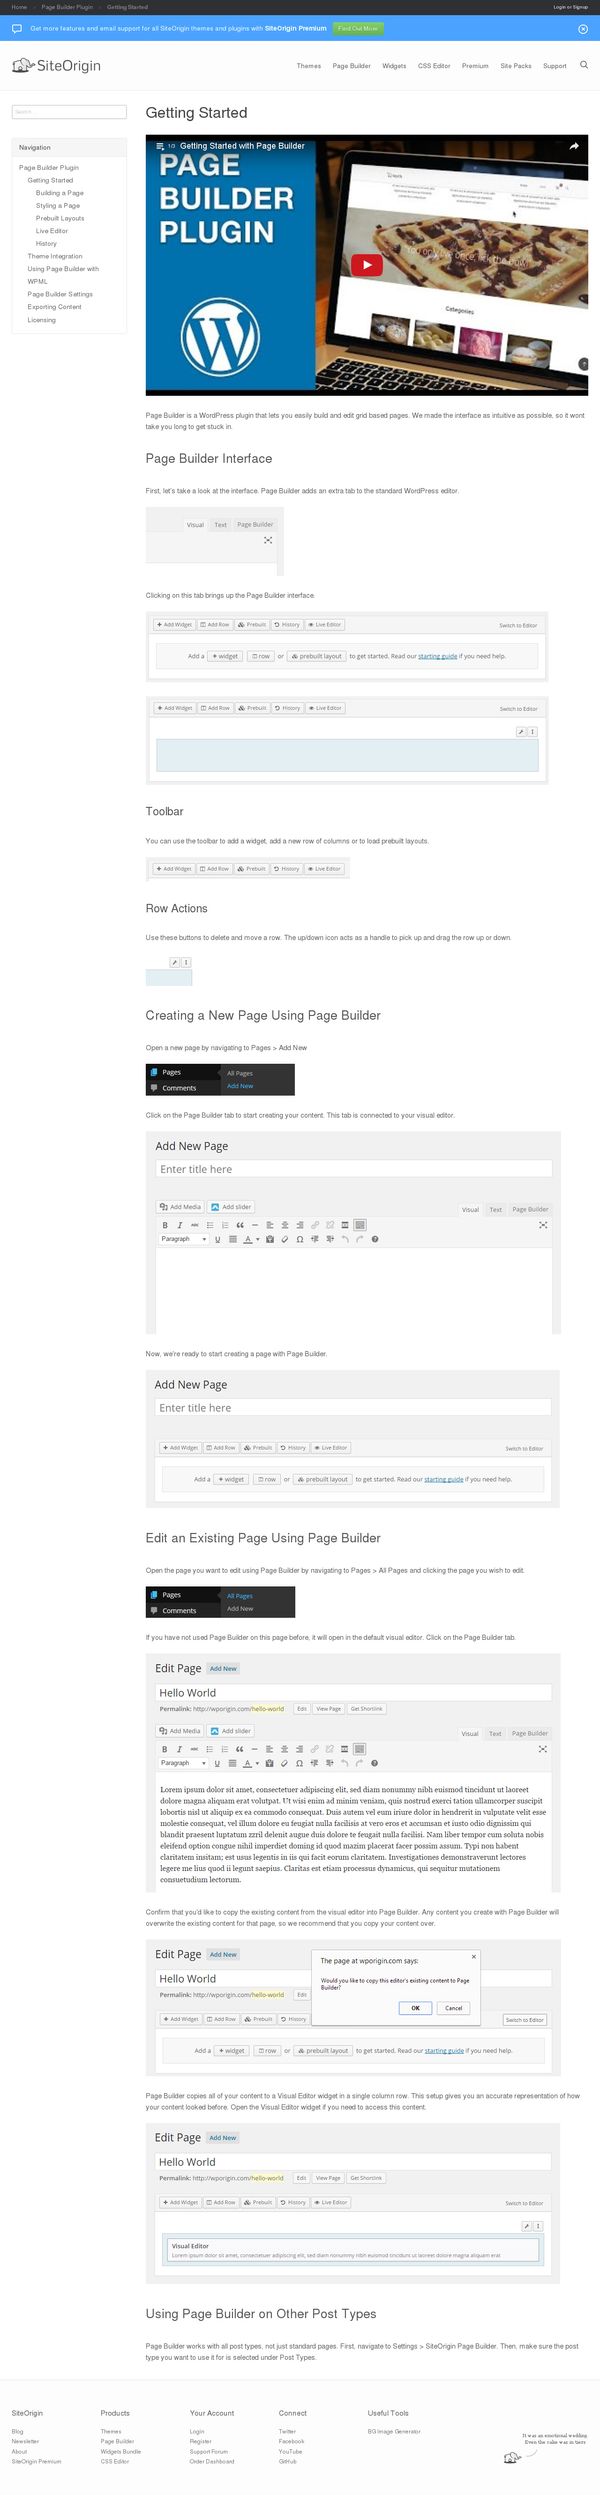 Getting Started With Page Builder - SiteOrigin